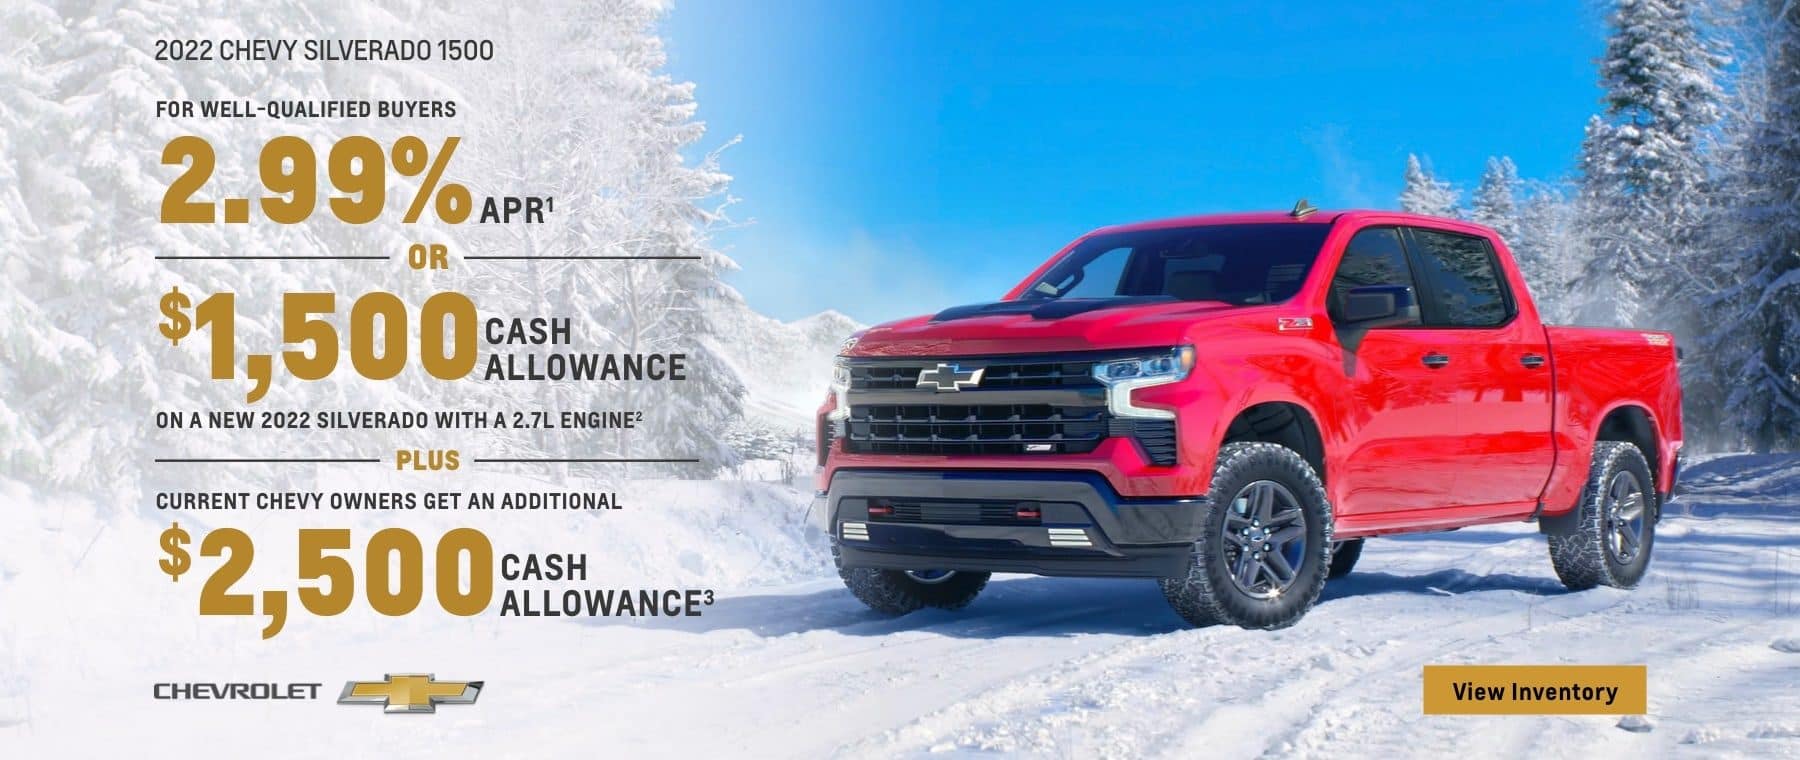 2022 Chevy Silverado 1500. For well-qualified buyers 2.99% APR. Or, $1,500 cash allowance on a new 2022 Silverado with a 2.7L engine. Plus, current Chevy owners get an additional $2,500 cash allowance.